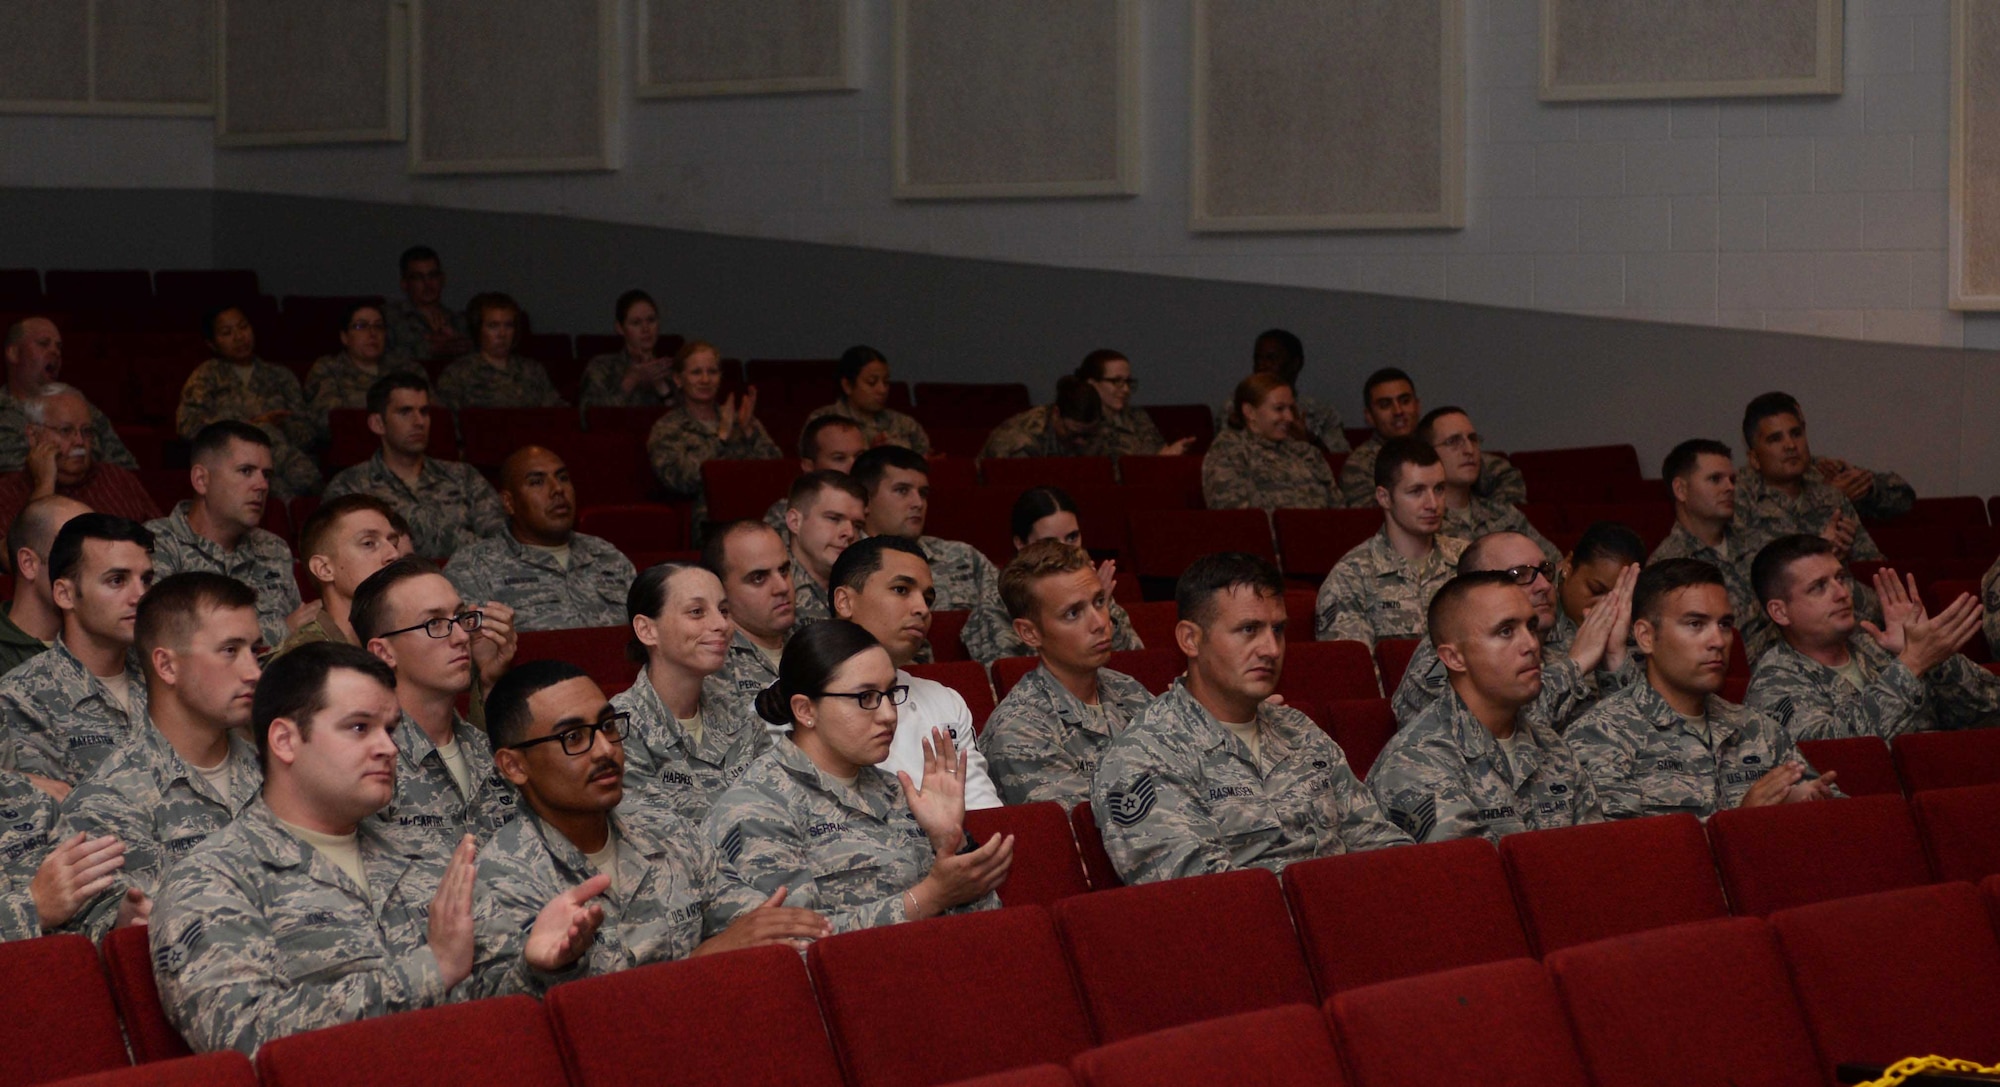 Airmen assigned to the 28th Bomb Wing applaud speakers during a Striker Speaking Series symposium at Ellsworth Air Force Base, S.D., July 21, 2016. Approximately 250 Airmen attended the panel and engaged in discussions about exercising deterrence and how their jobs contribute to that cause. (U.S. Air Force photo by Airman 1st Class Sadie Colbert)